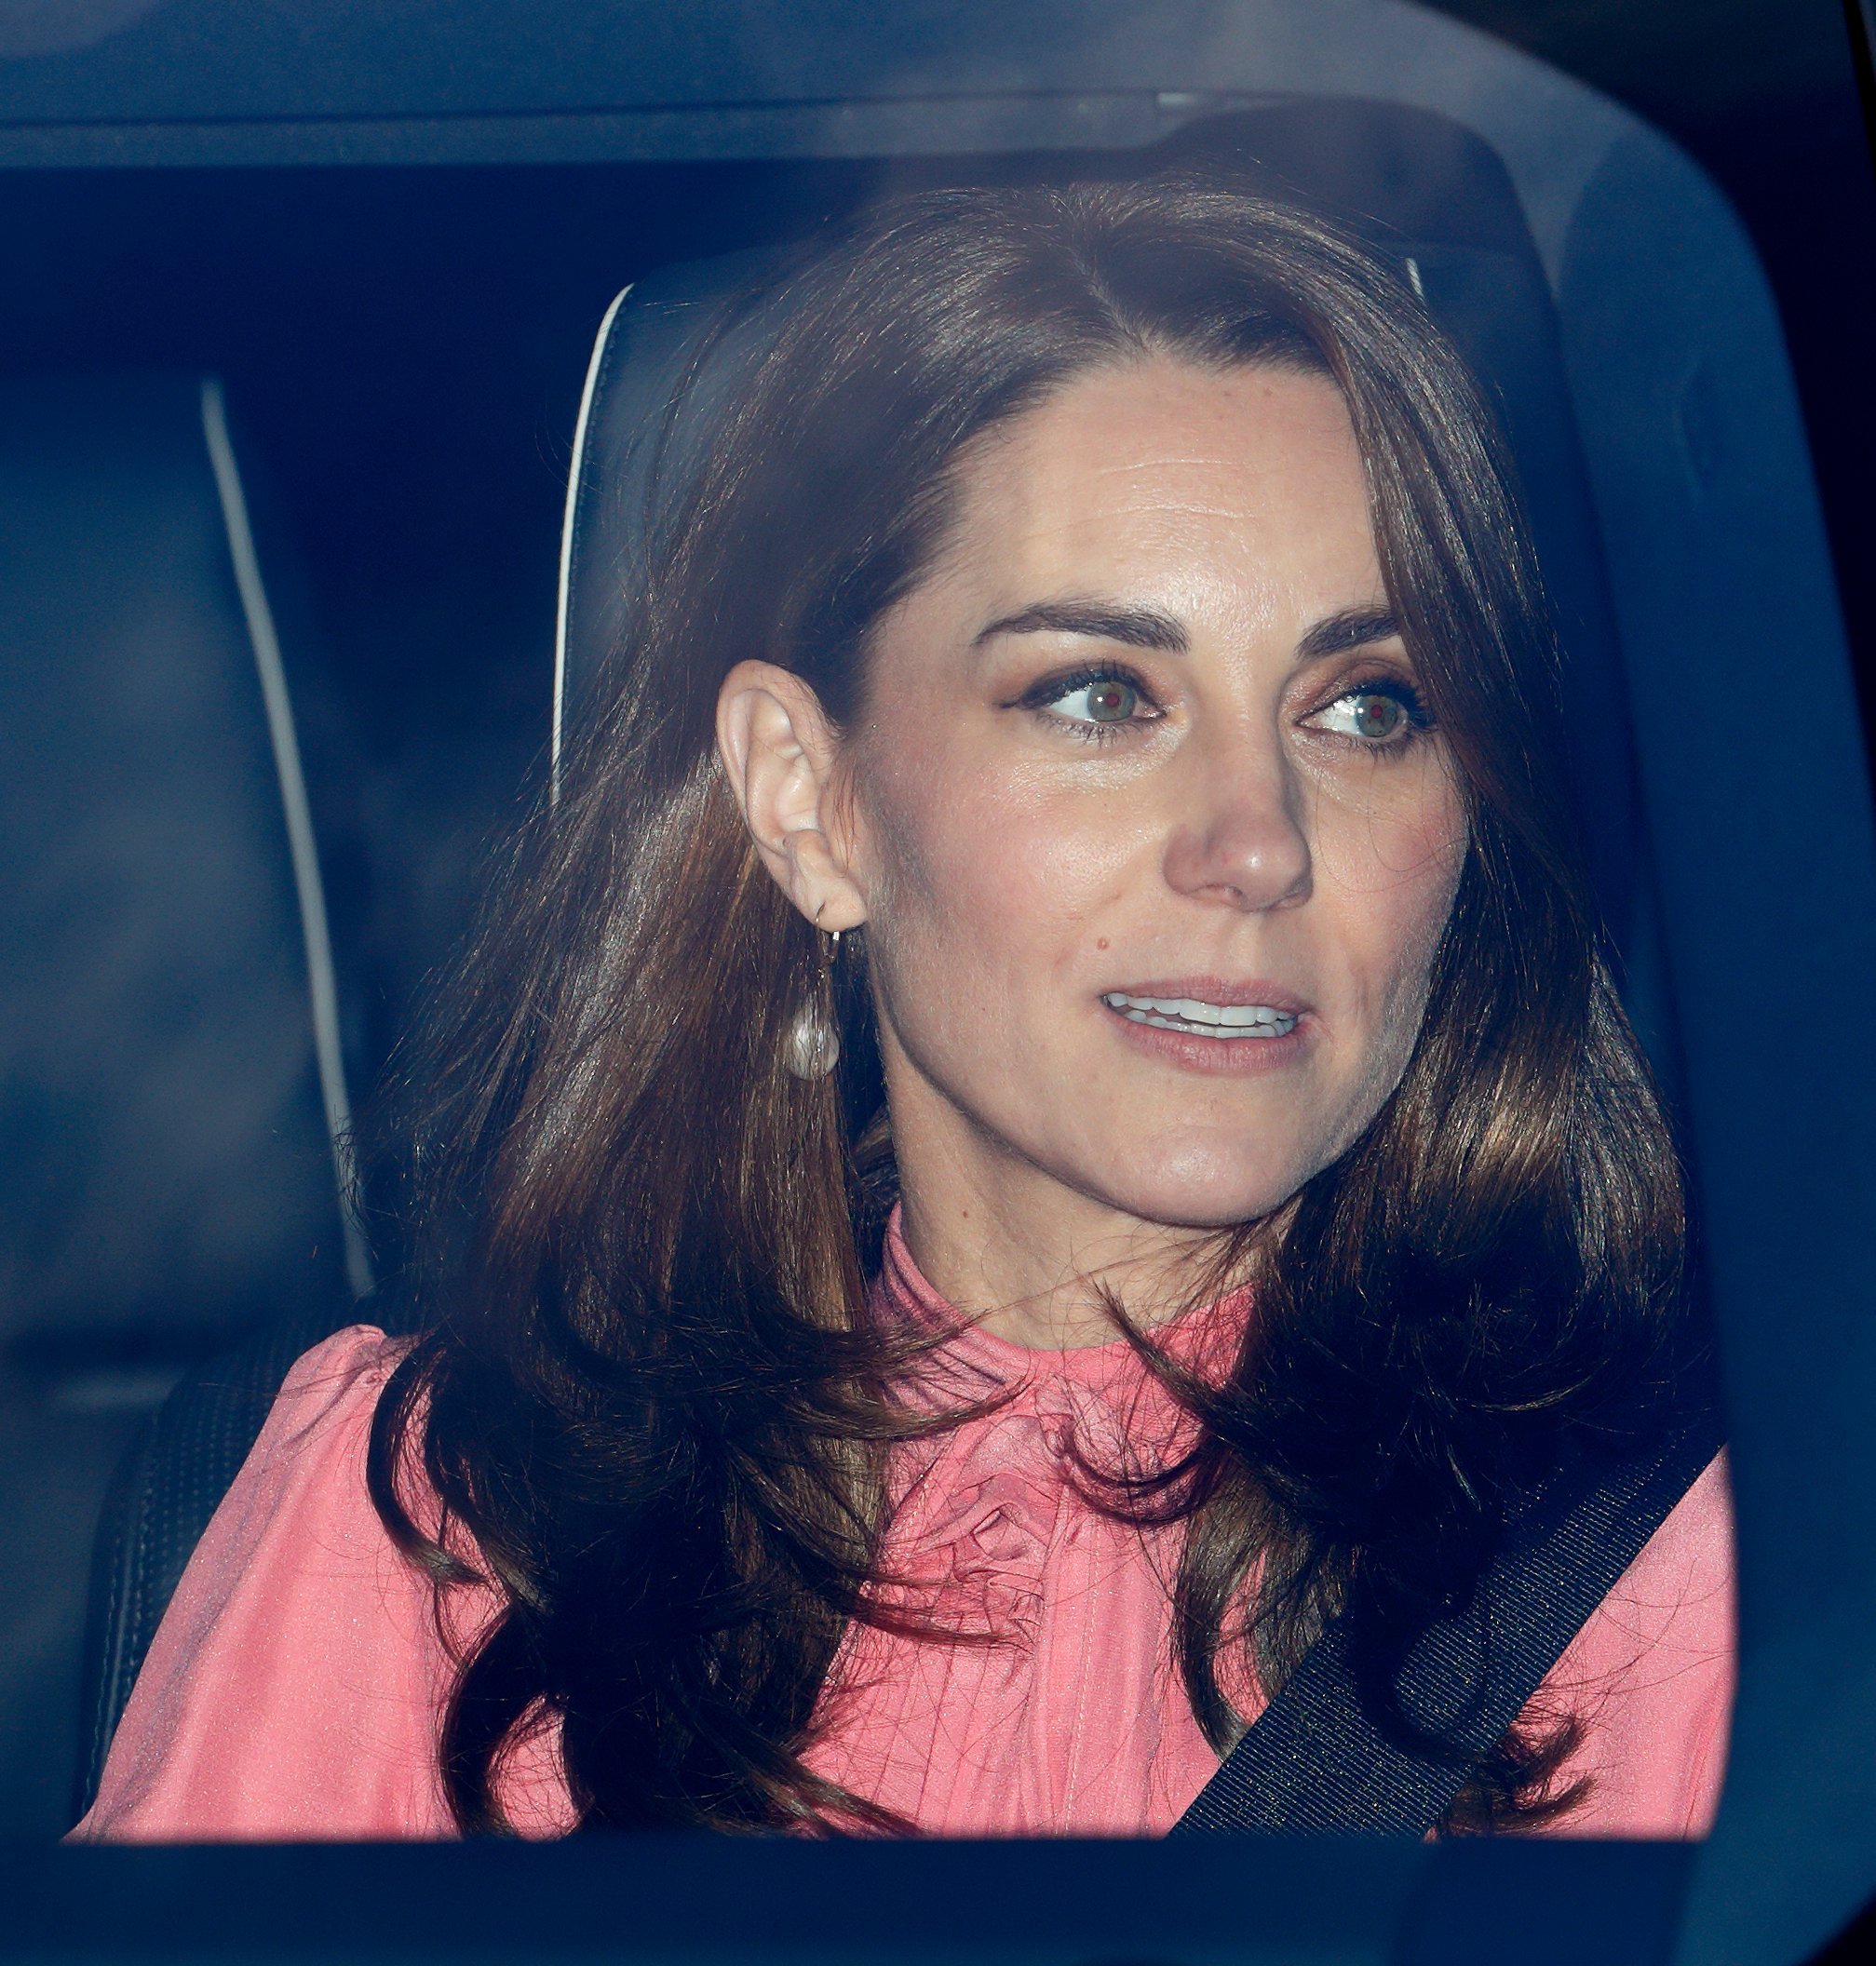 Kate Middleton, Duchess of Cambridge, attends a Christmas Lunch at Buckingham Palace on December 19, 2018 | Photo: Getty Images